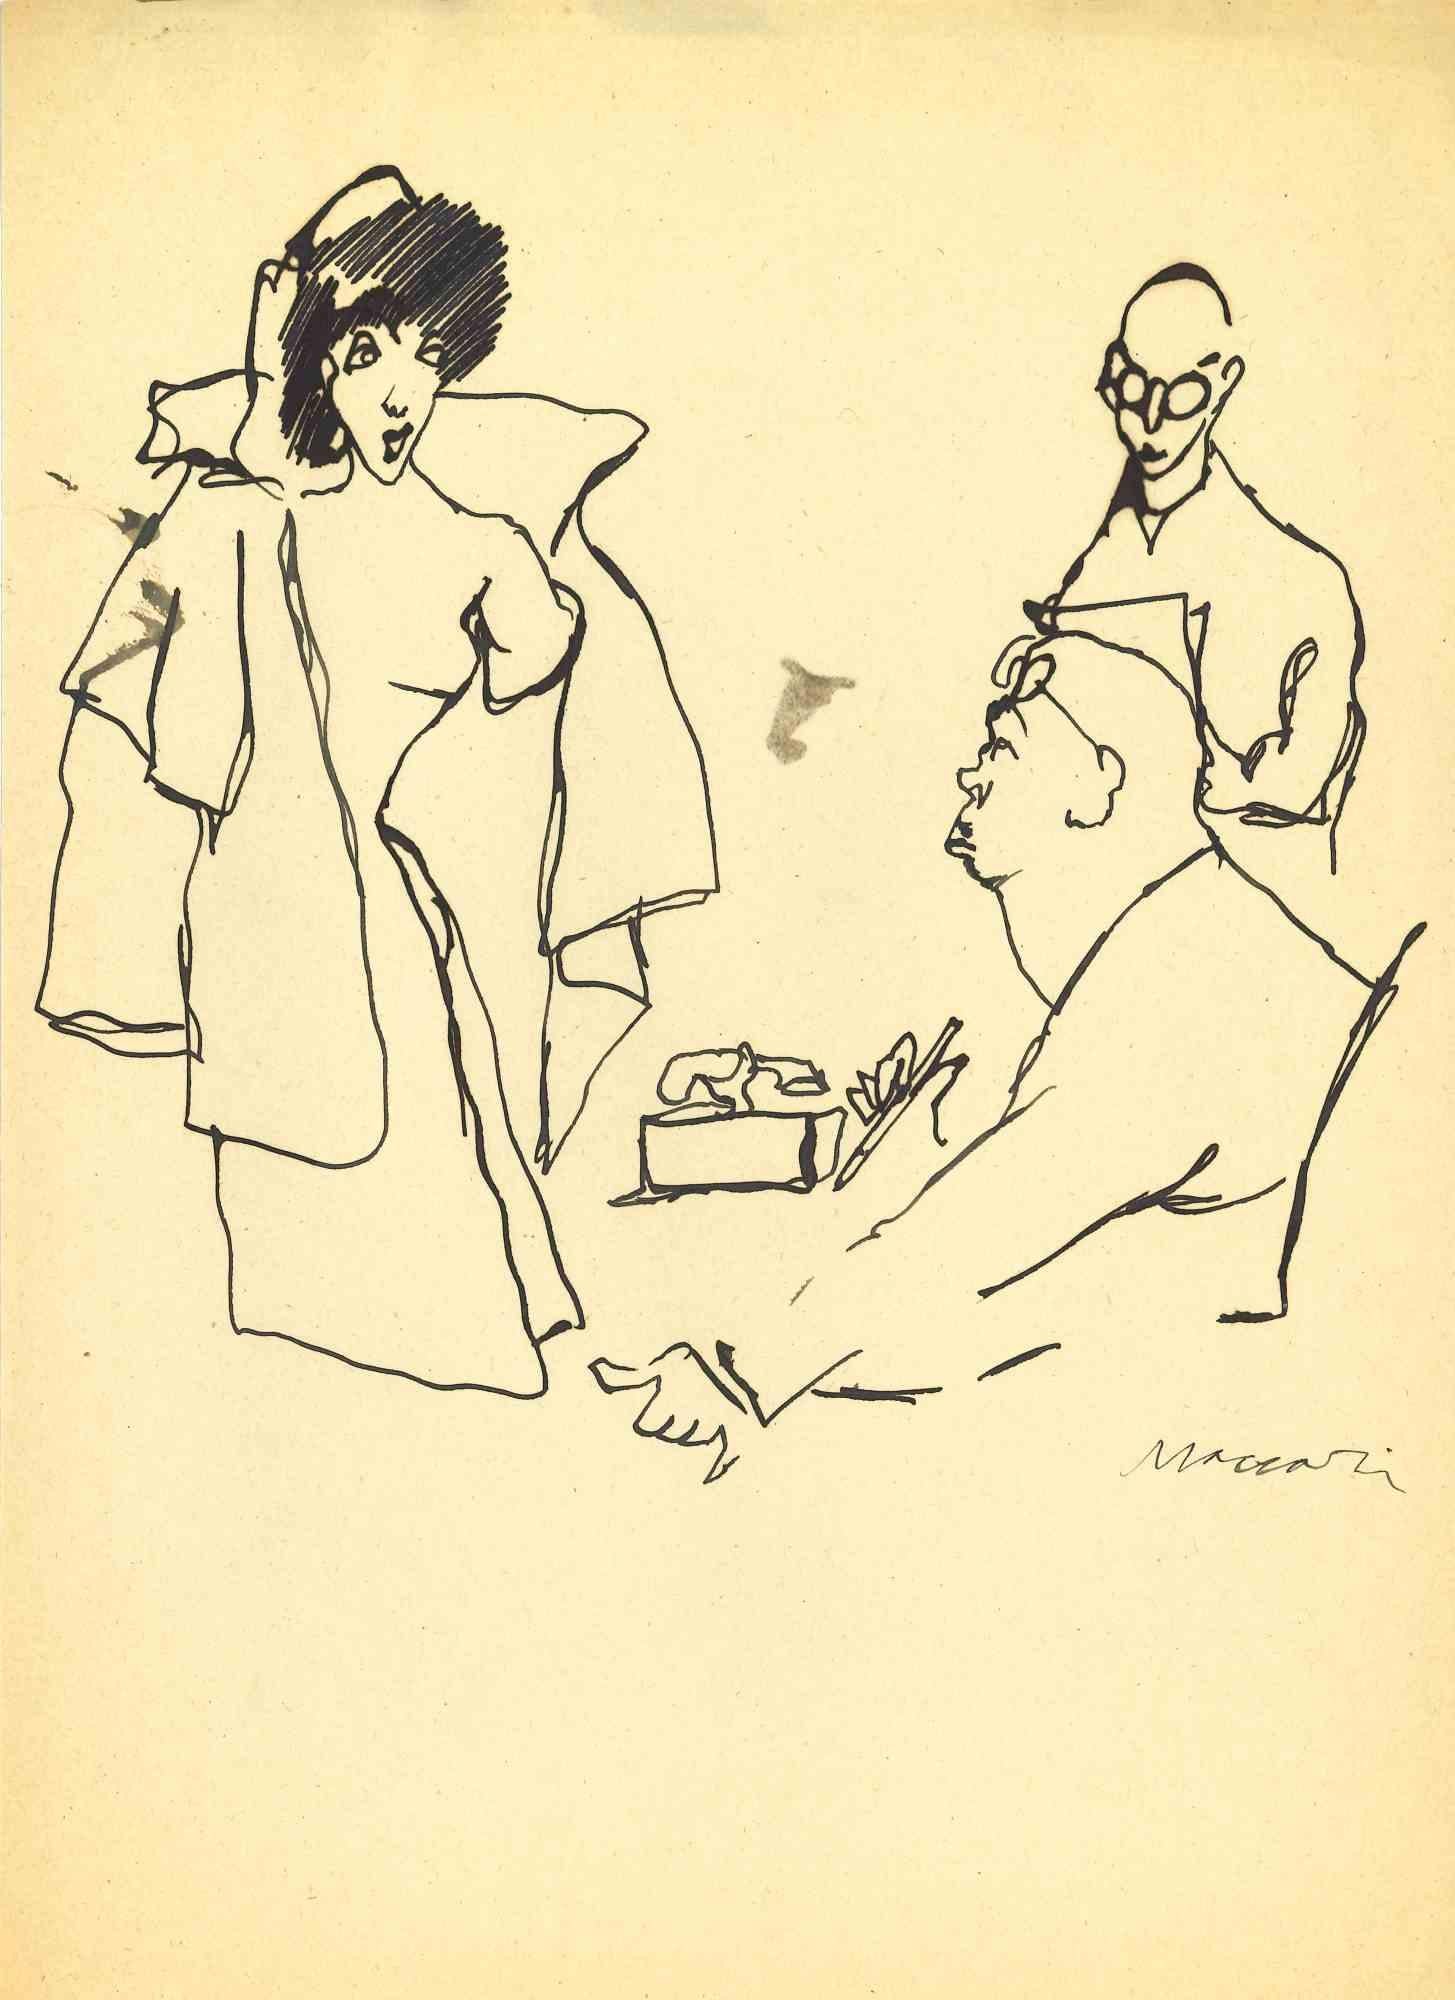 Hiring Interview is a China ink Drawing realized by Mino Maccari  (1924-1989) in the Mid-20th Century.

Hand-signed on the lower.

Good conditions.

Mino Maccari (Siena, 1924-Rome, June 16, 1989) was an Italian writer, painter, engraver and